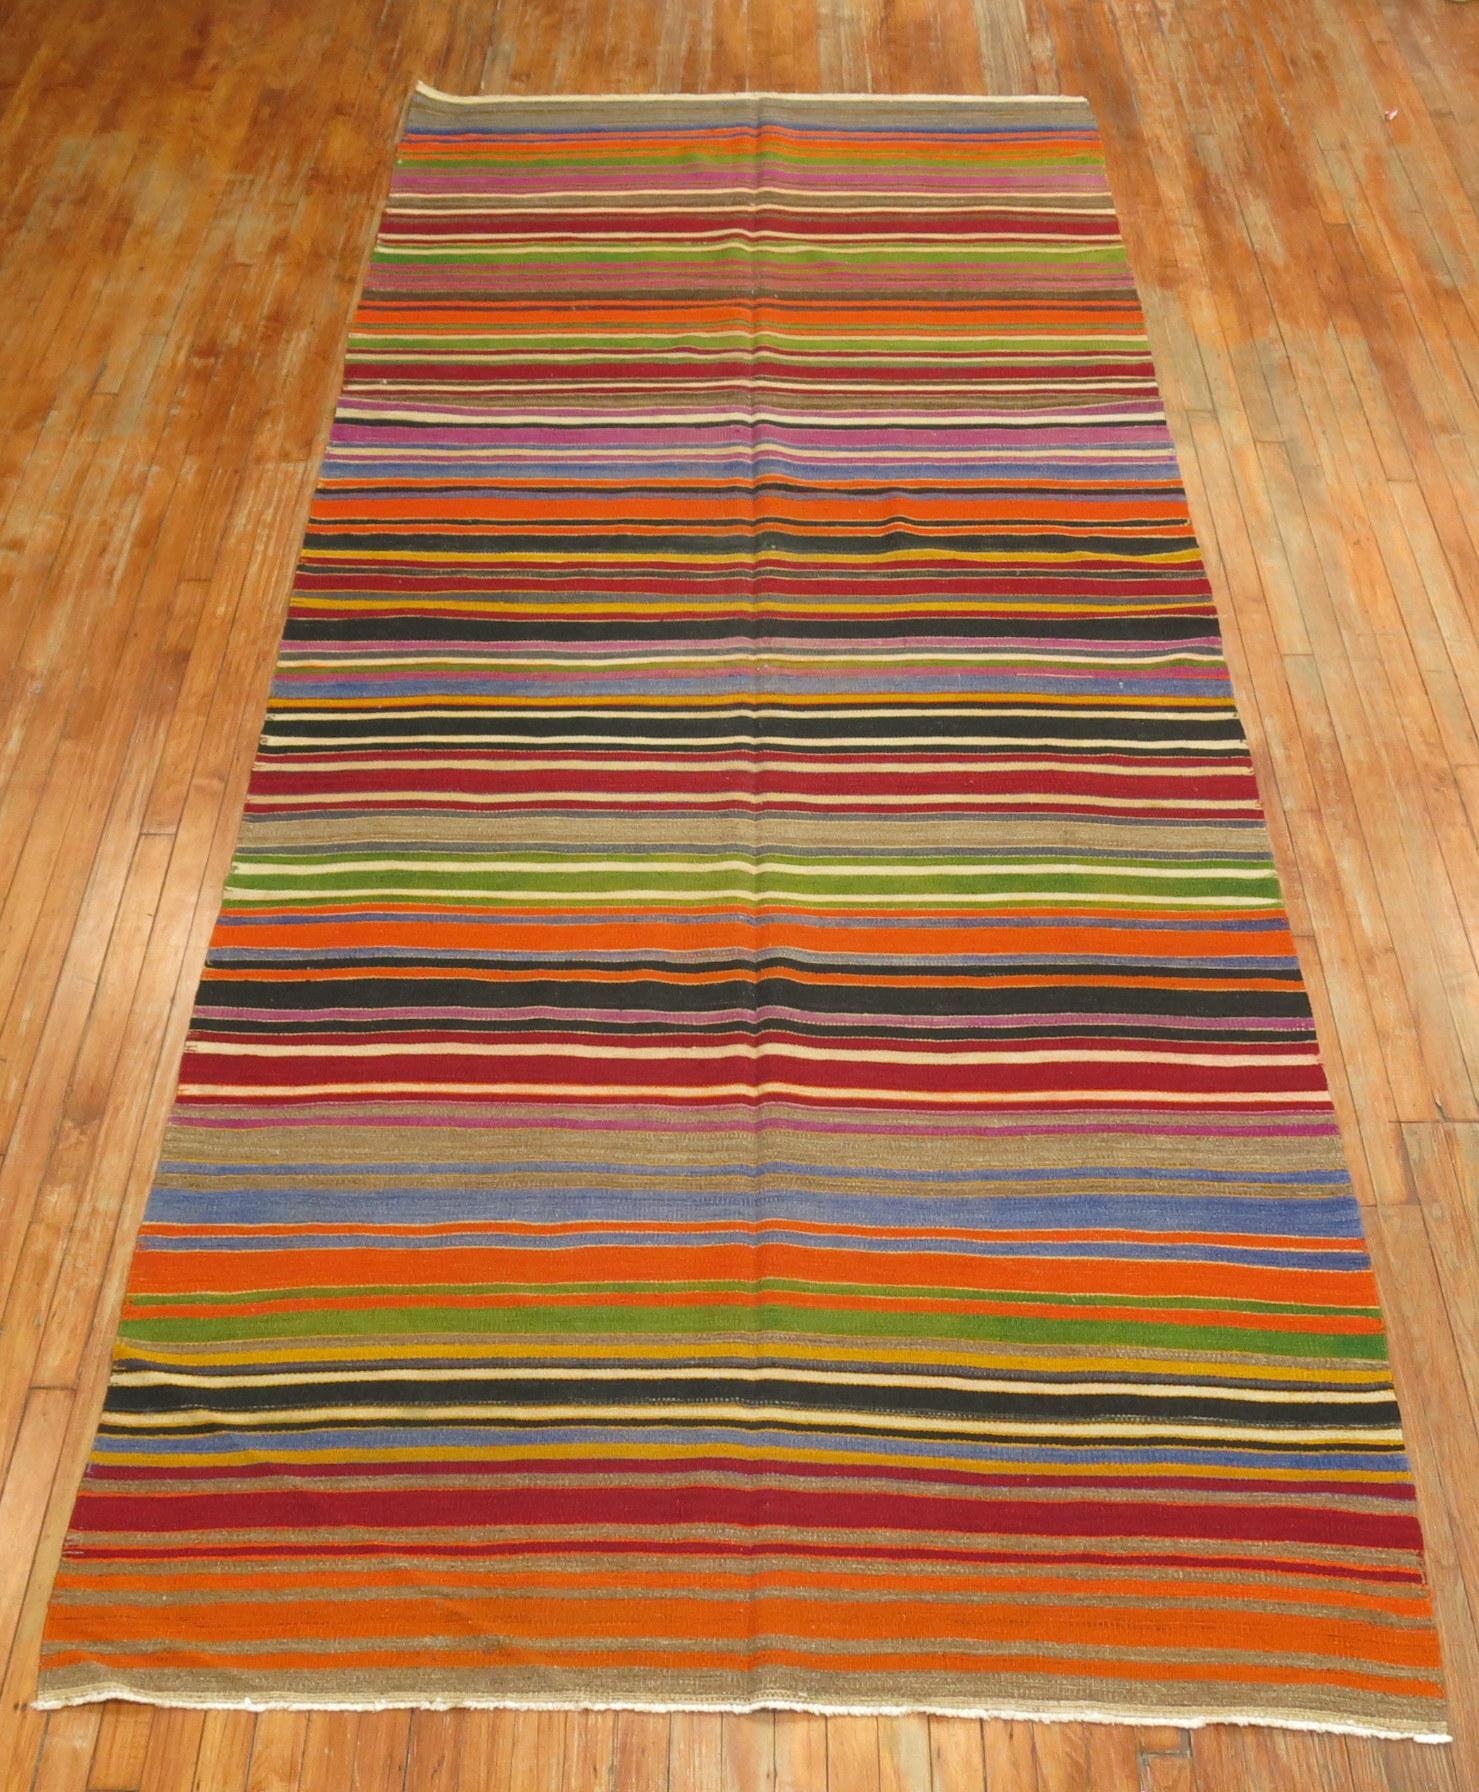 Mid-20th century hand knotted one of a kind Turkish Kilim with a brightly colored striped design.

Measures: 5'3